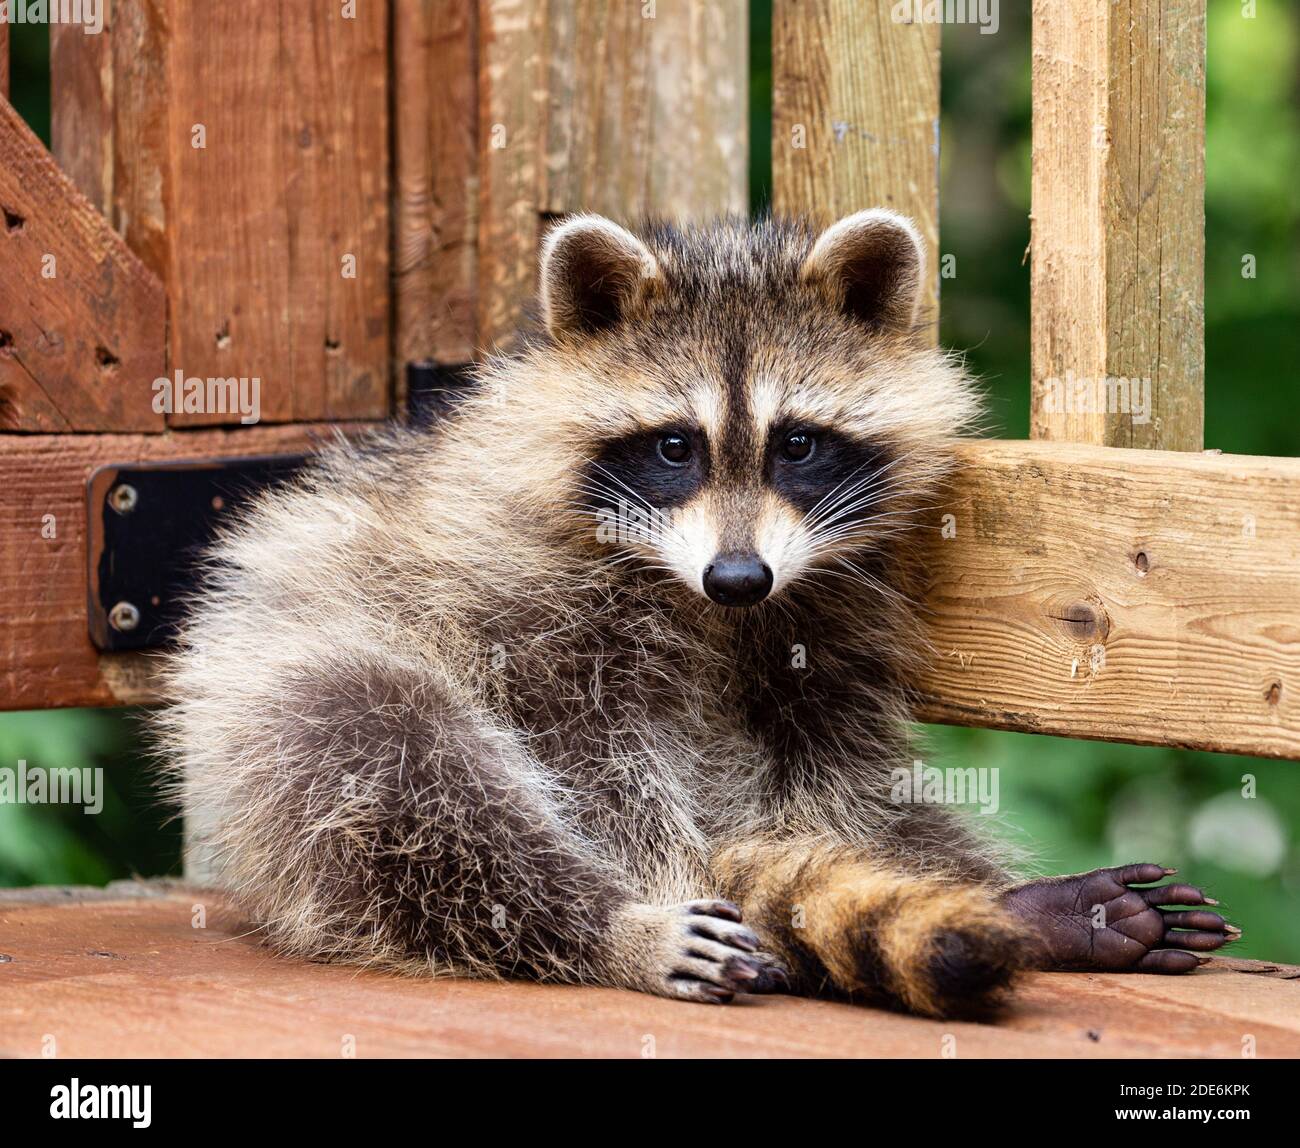 Closeup on a young raccoon sitting on a wooden deck preening, taking time to look at the camera lens. Stock Photo